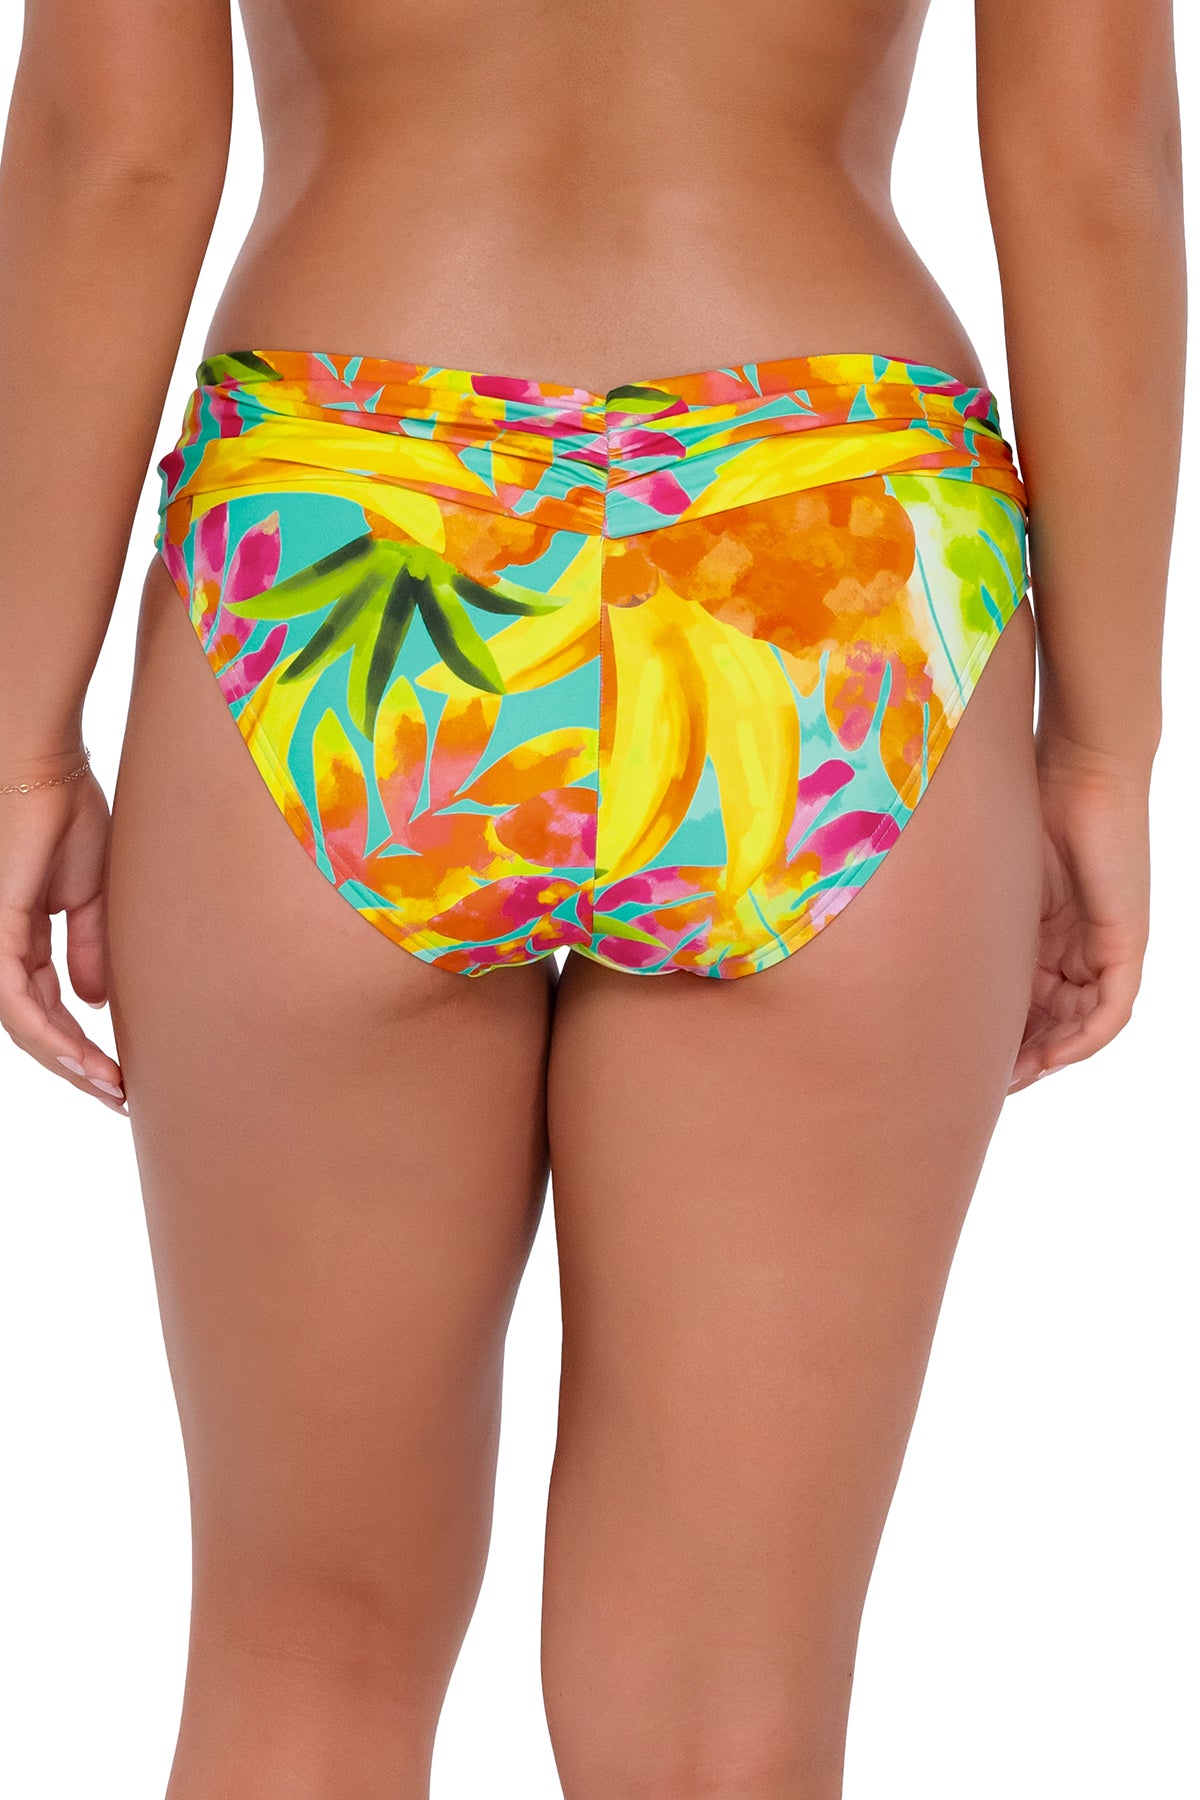 Back pose #4 of Taylor wearing Sunsets Lush Luau Unforgettable Bottom